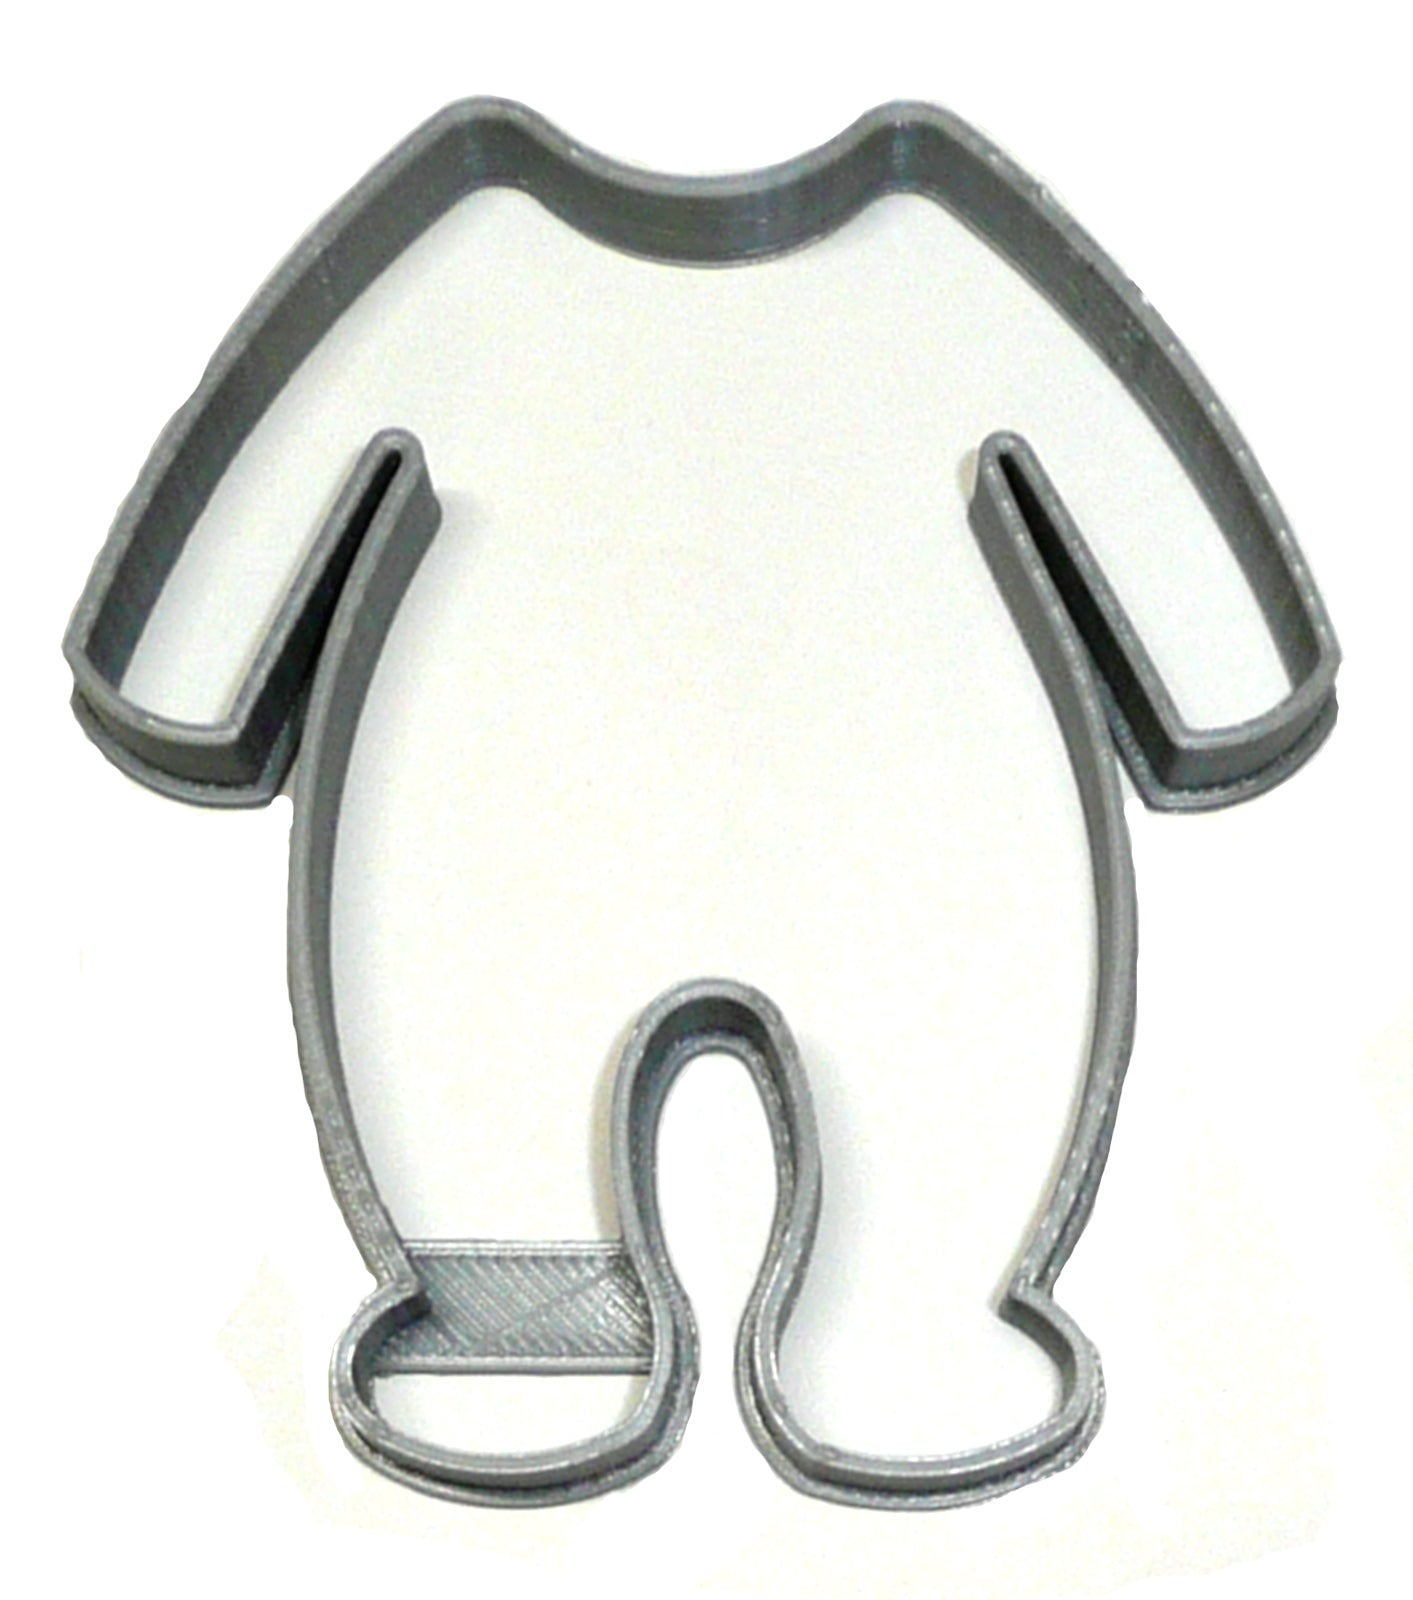 Footie Pajamas Infant Footed Sleepwear Clothing Garment Cookie Cutter USA PR2465